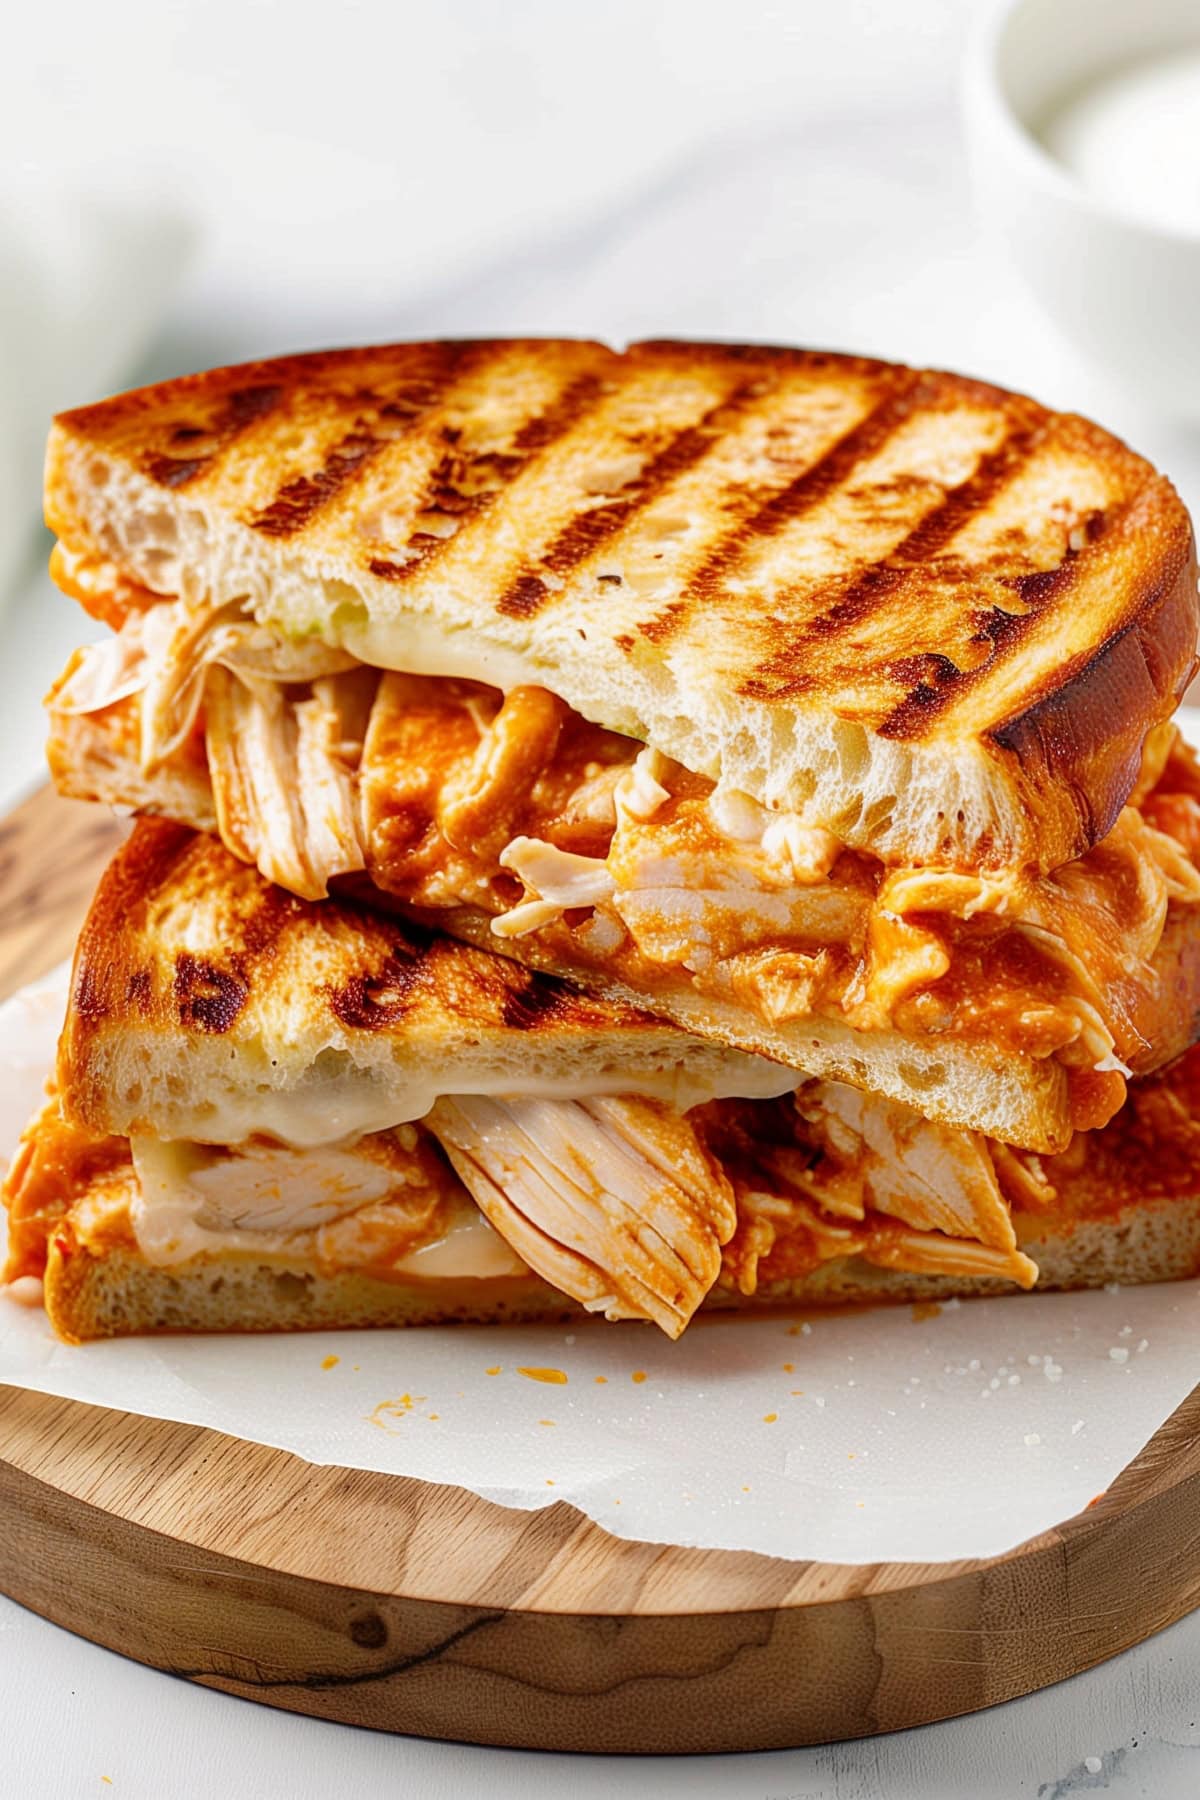 Flavorful buffalo chicken panini, featuring hot sauce and creamy ranch.